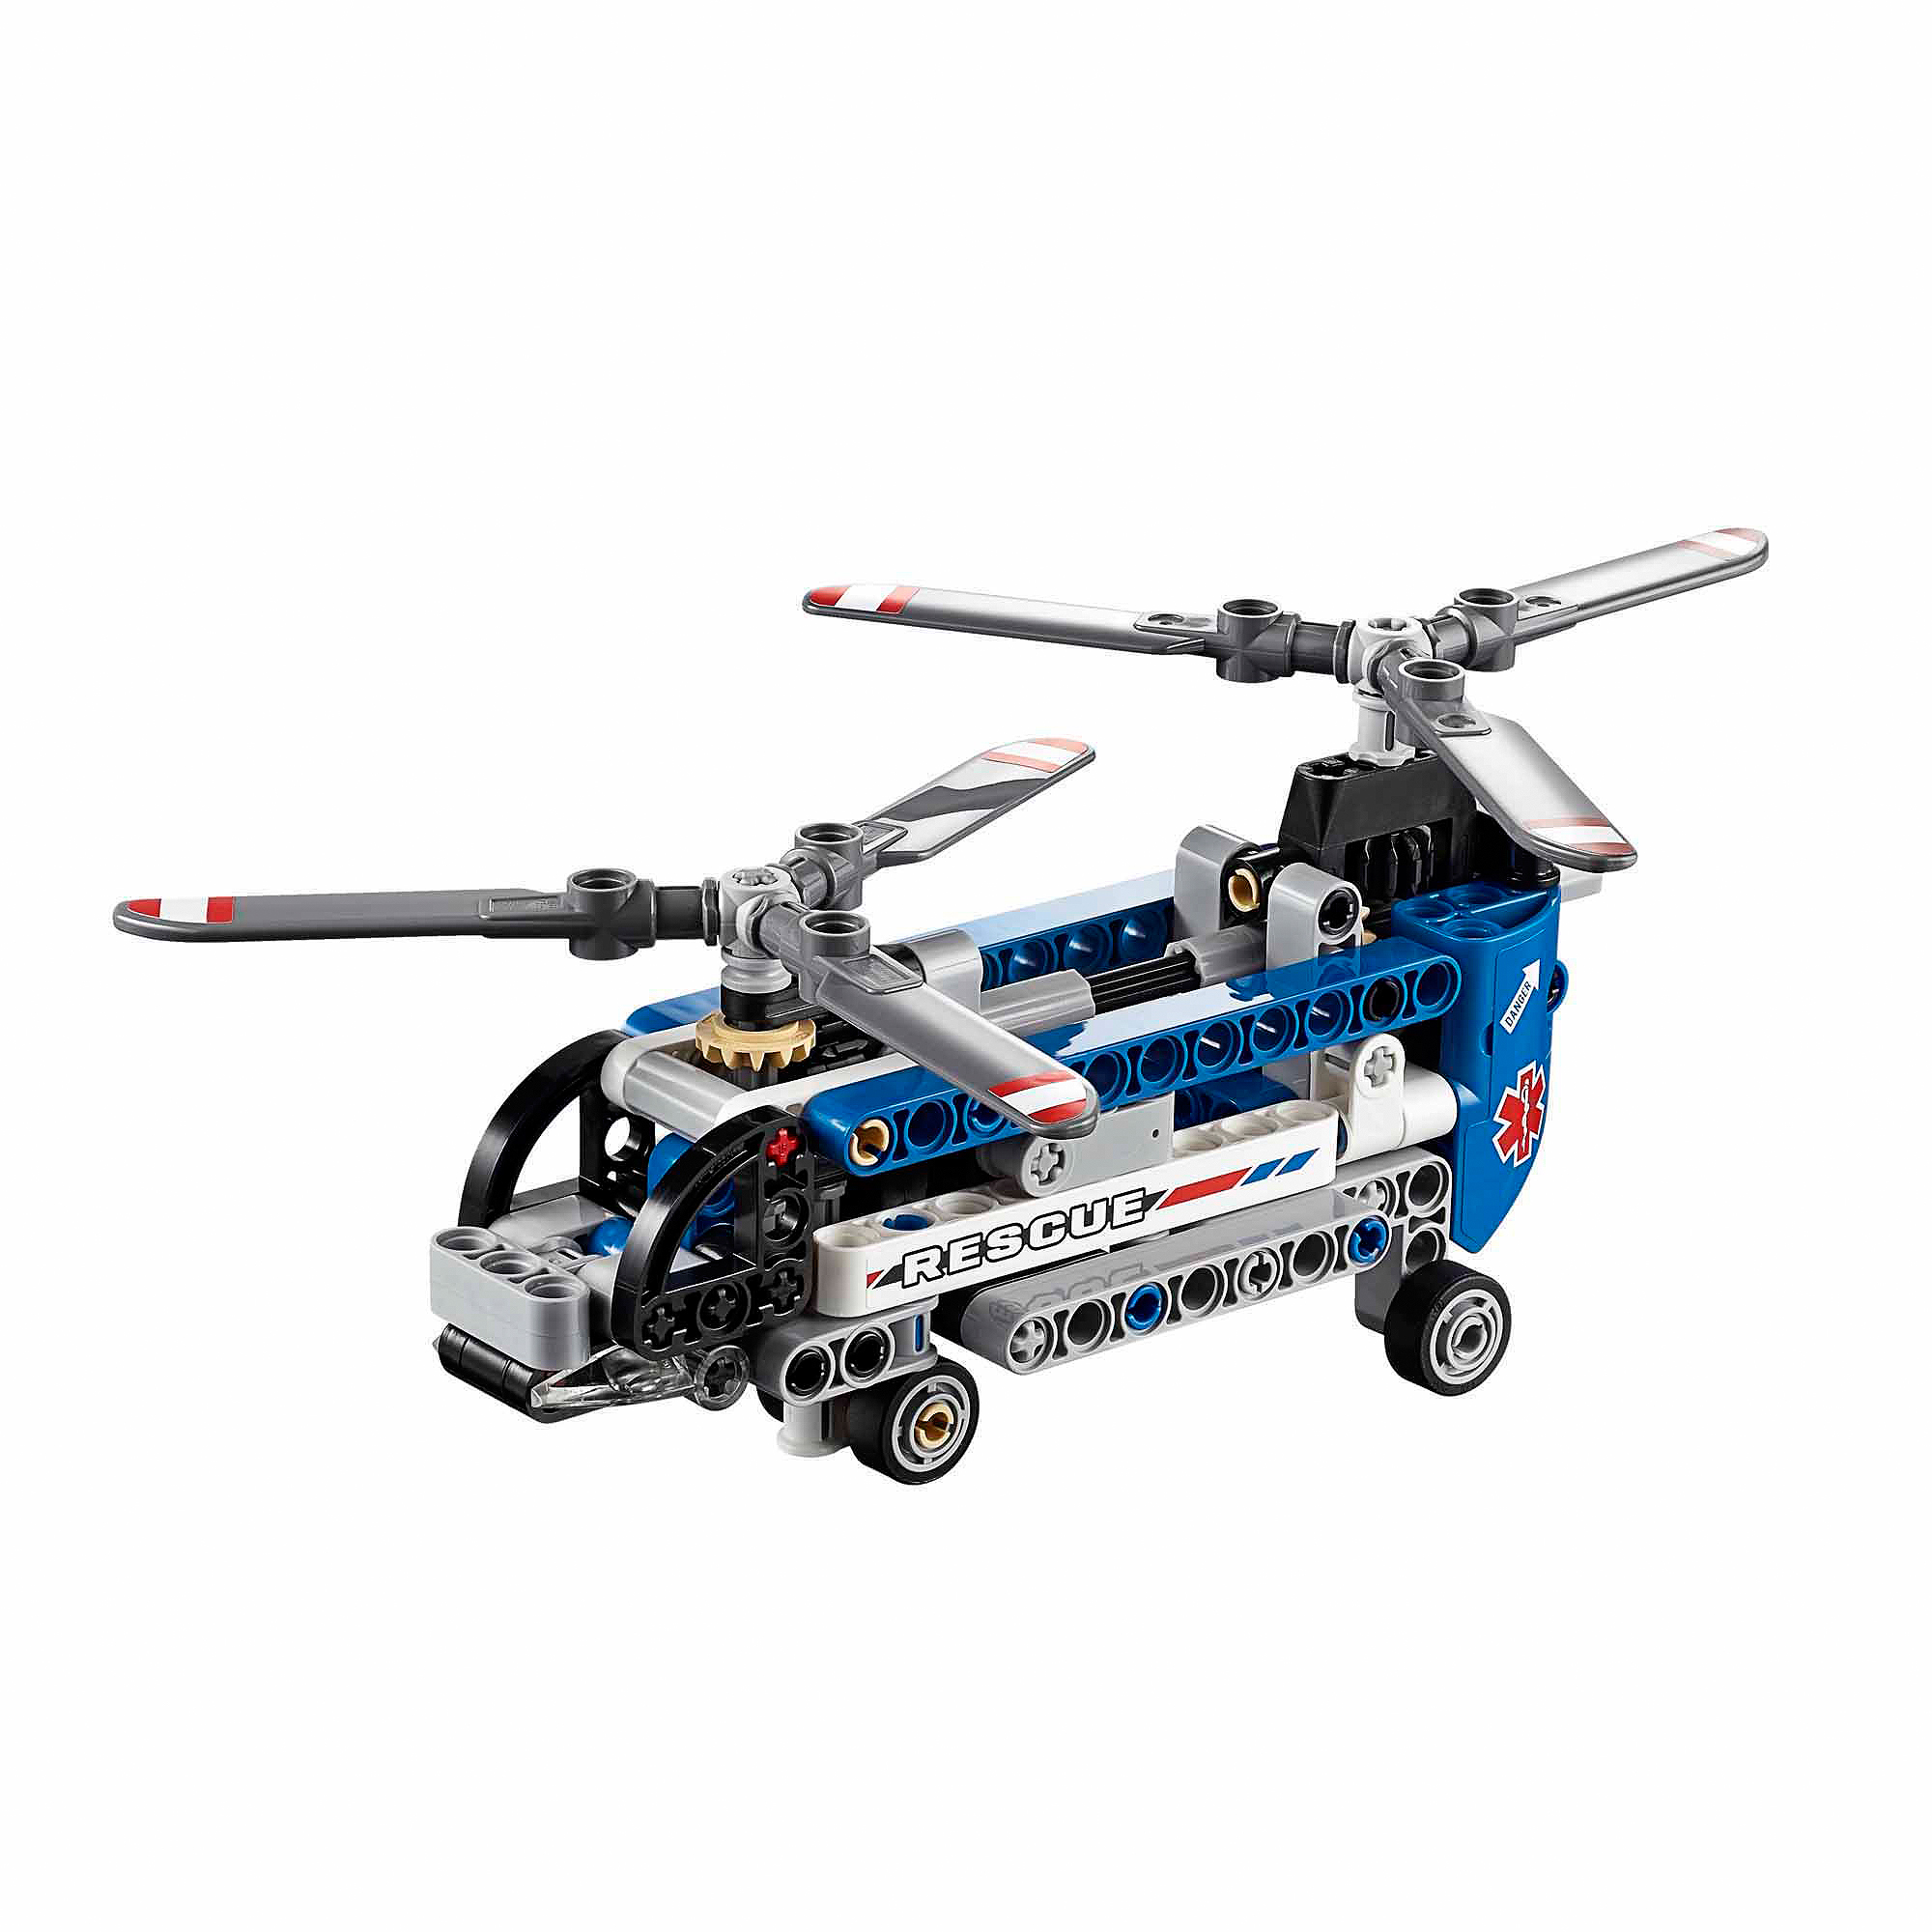 New Lego Building Toy Technic Twin-Rotor Helicopter Model Kit 145-Piece 42020 ! - image 4 of 6